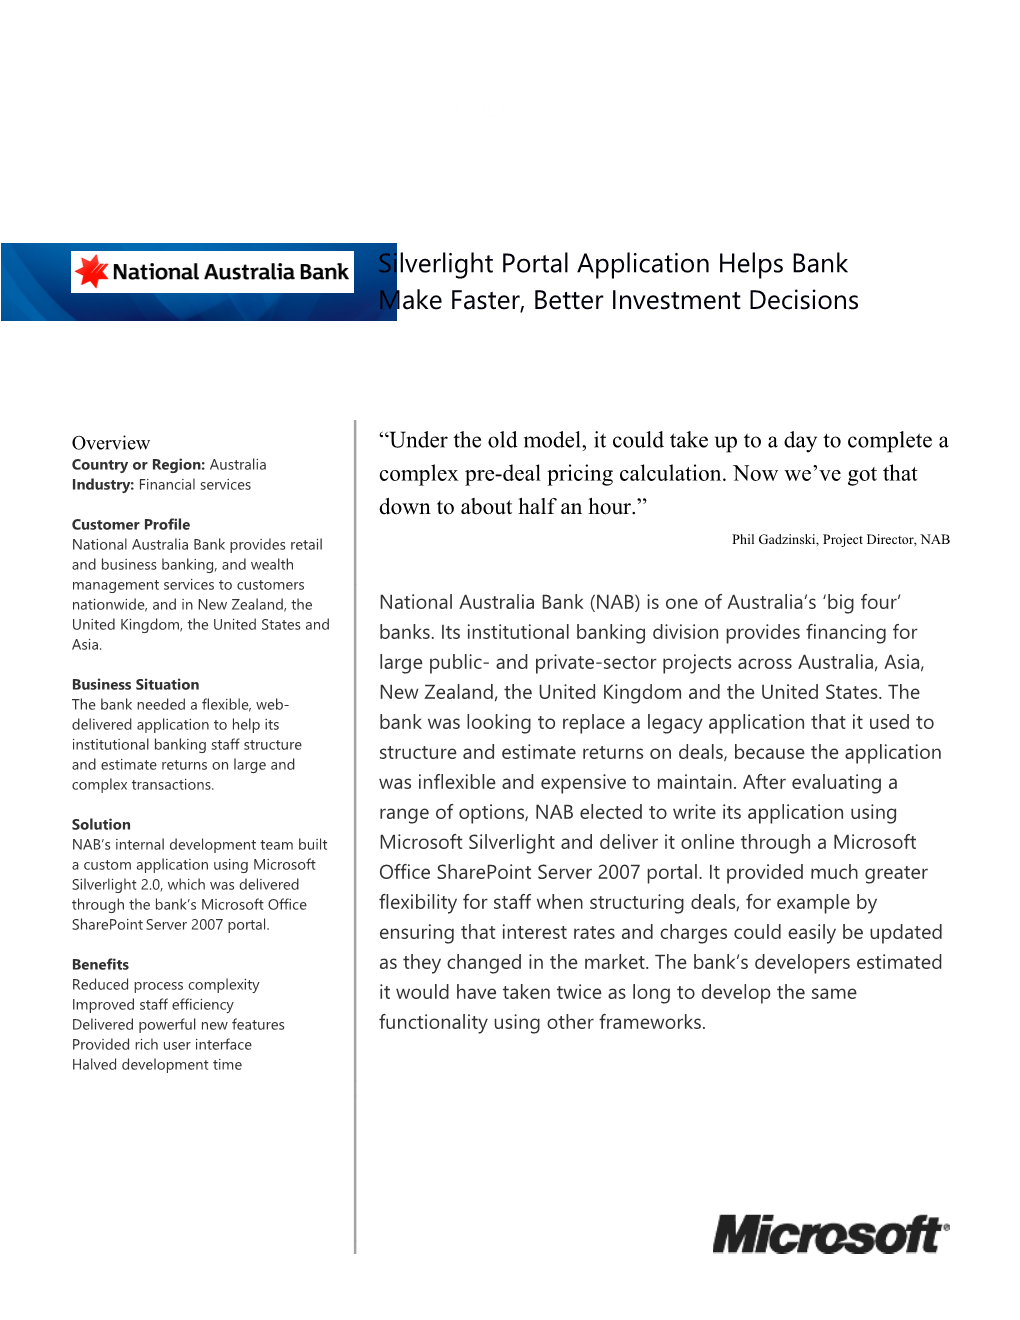 Metia CEP Silverlight Portal Application Helps Bank Make Faster, Better Investment Decisions